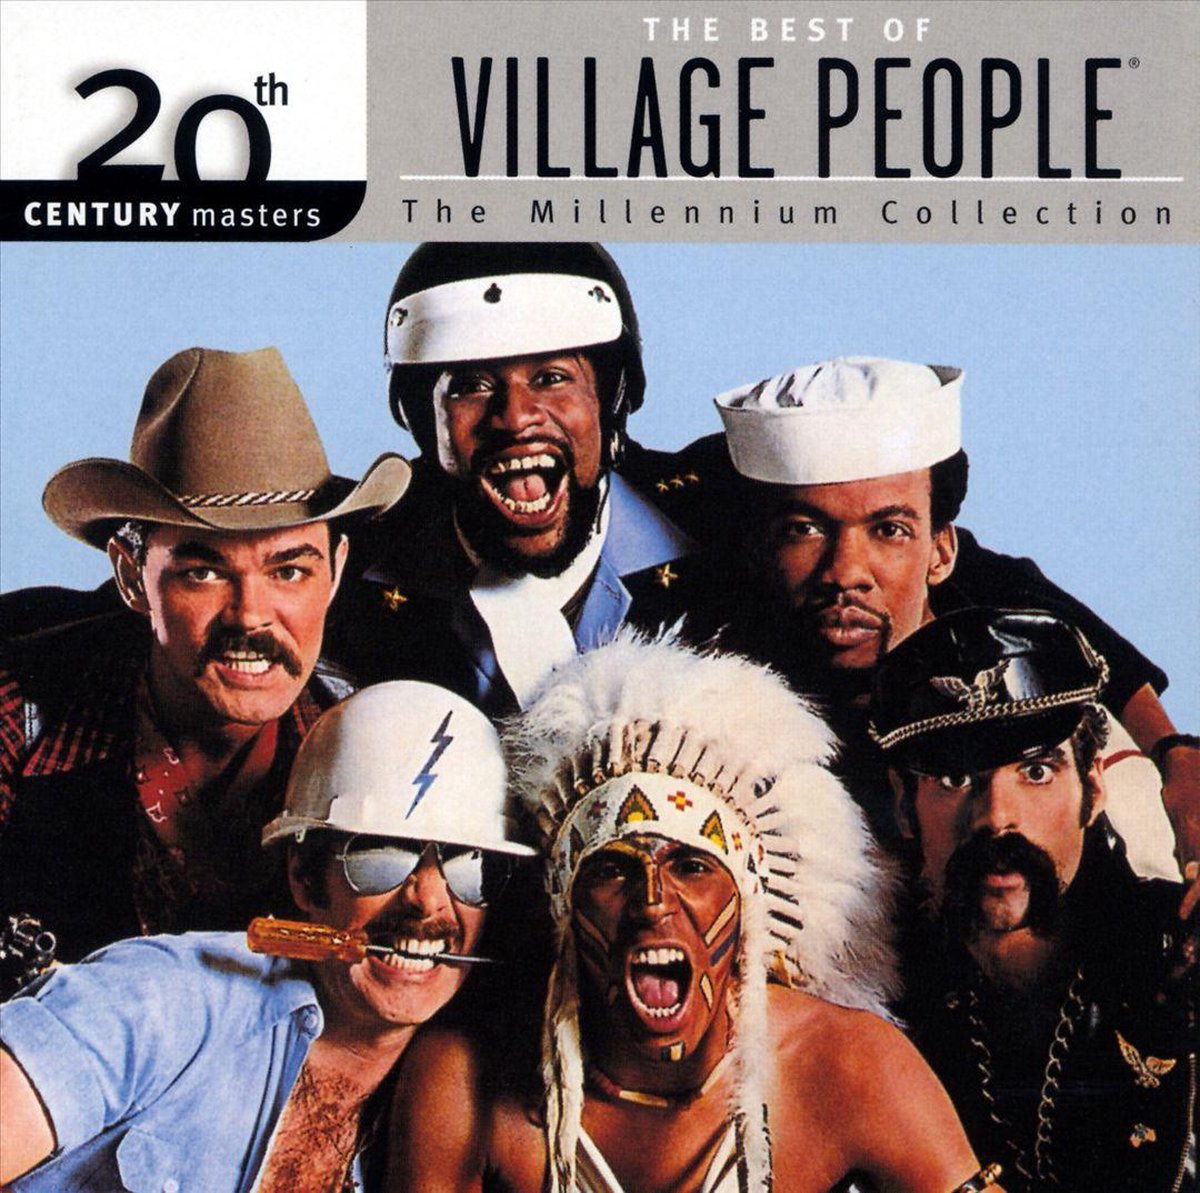 The Best Of Village People: 20th Century Masters The Millennium Collection - Village People